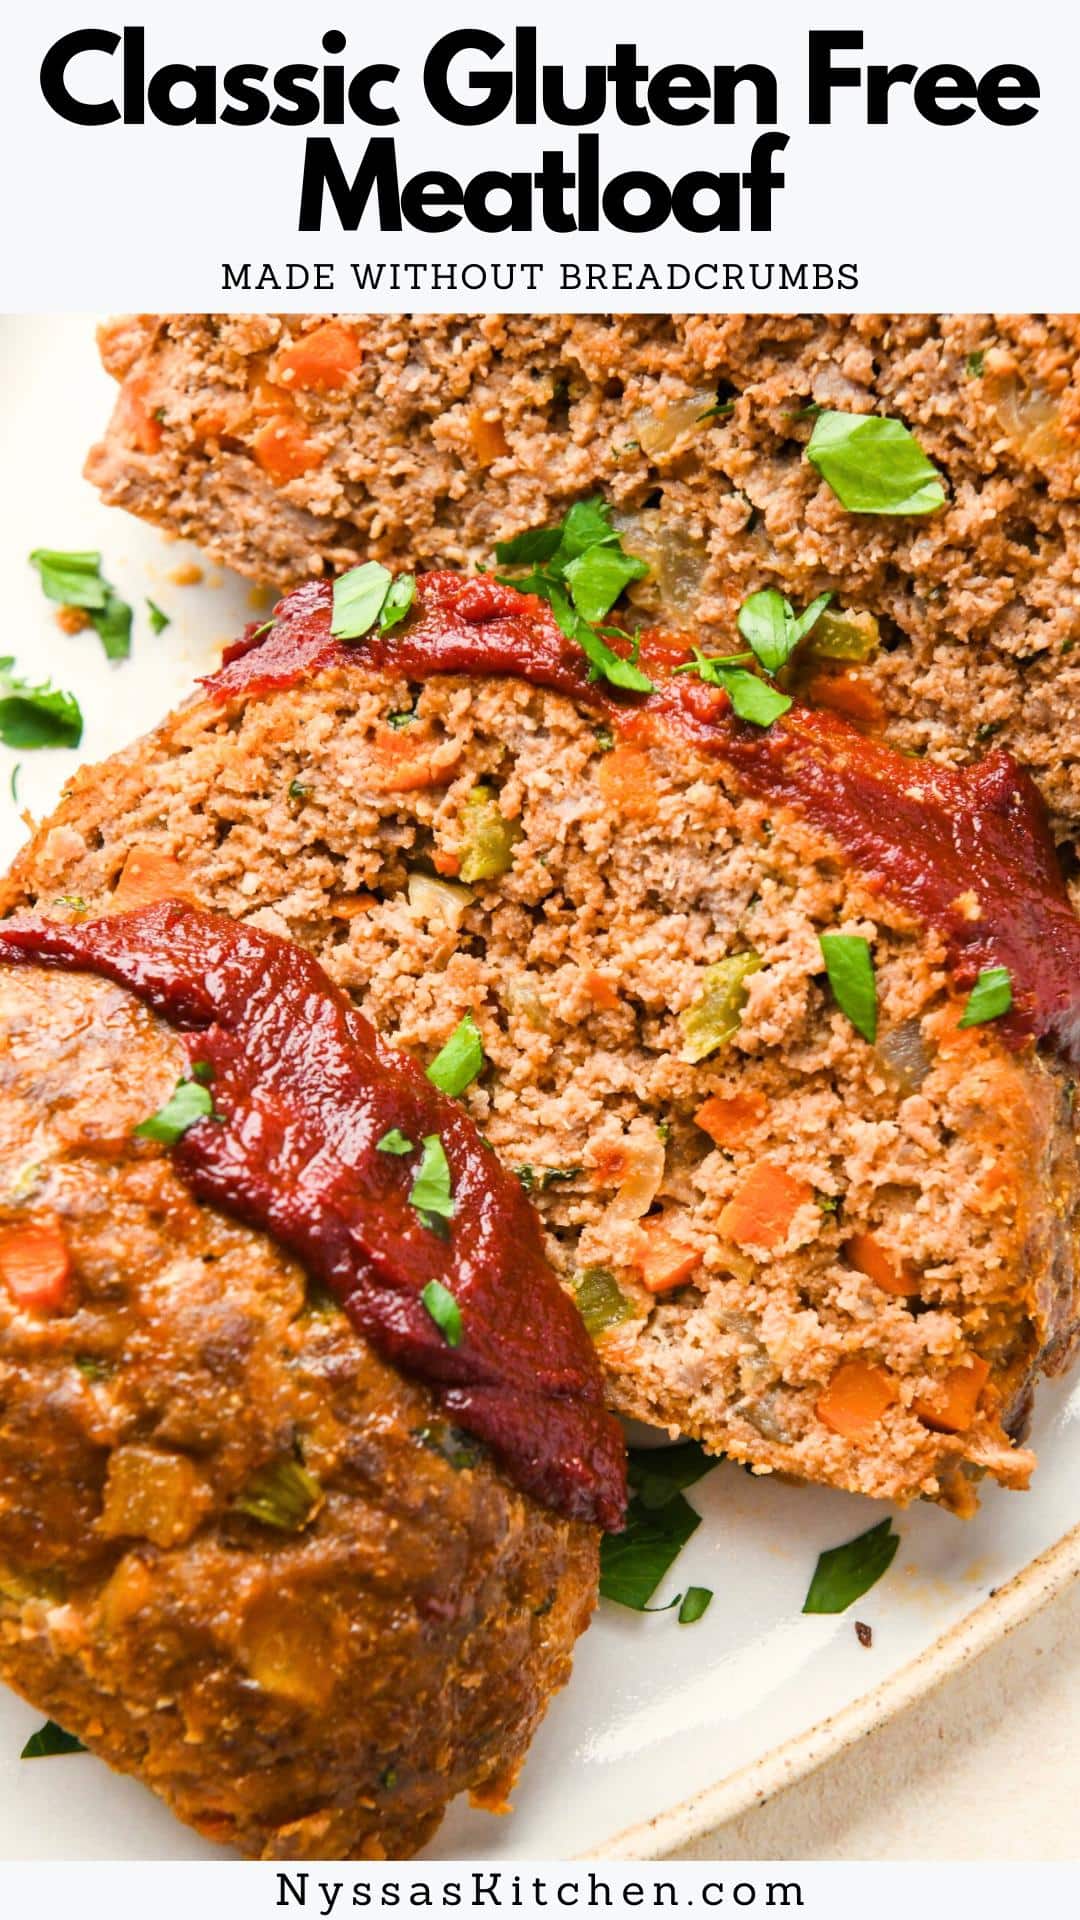 This classic gluten free meatloaf is the ultimate healthy comfort food! Made with all the traditional meatloaf ingredients and flavors you love but without any dairy, gluten, or sugar in the glaze. An easy recipe using ground beef and ground pork (or just ground beef!) that makes delicious leftovers. Kid friendly and perfect for the whole family! Recipe is dairy free, paleo friendly, Whole30 compatible, and grain free.